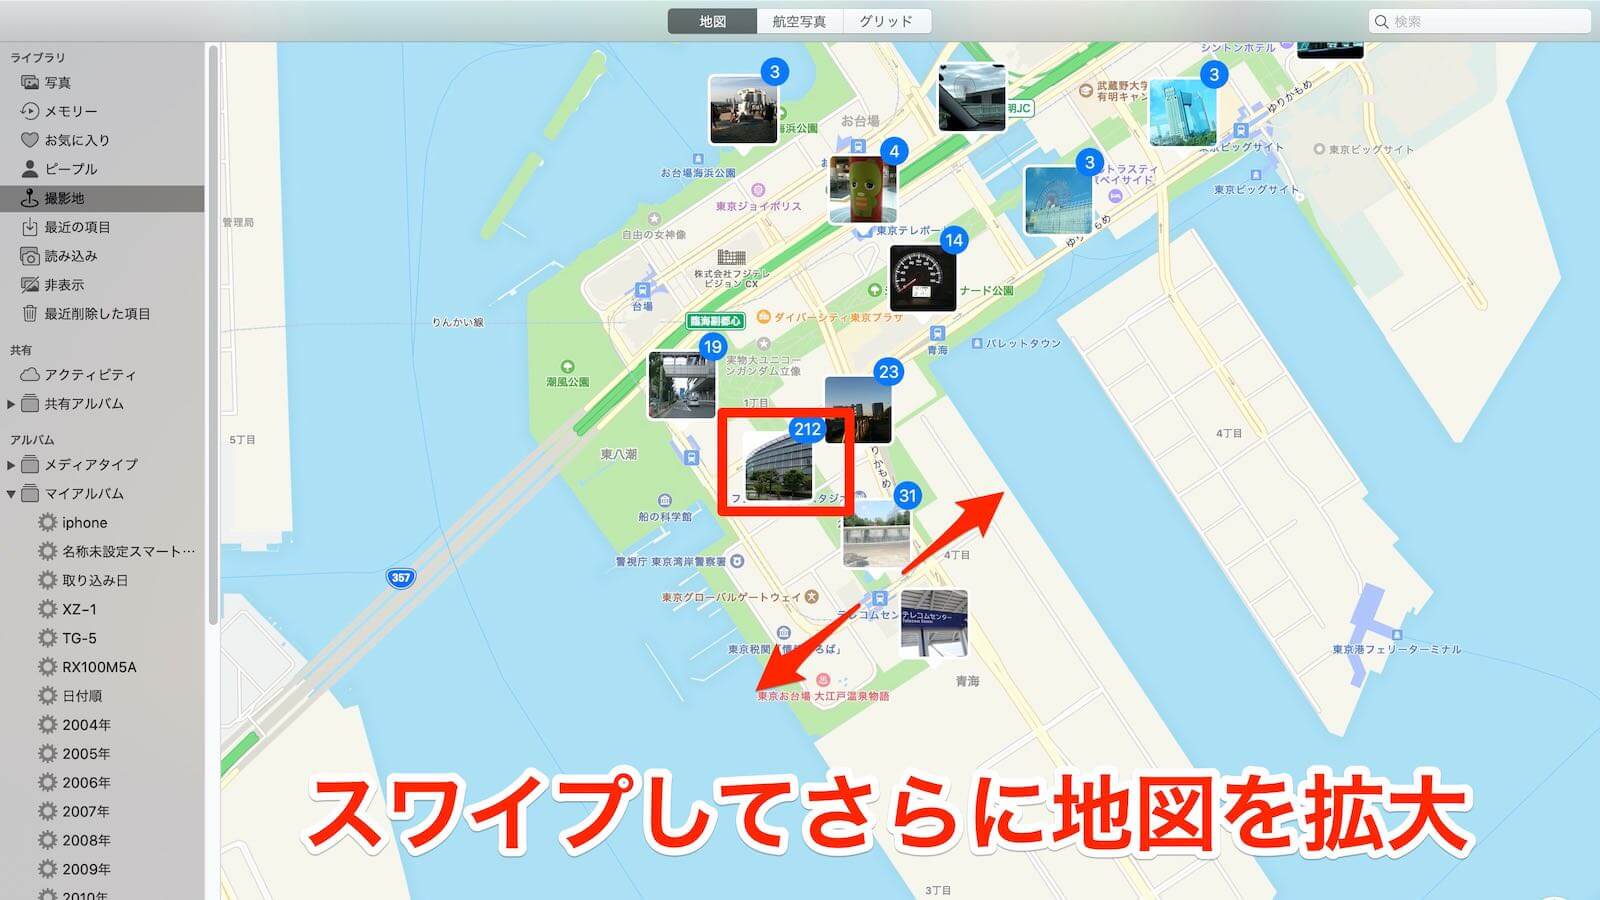 0221 Search images captured on your iPhone or Mac in one shot 07